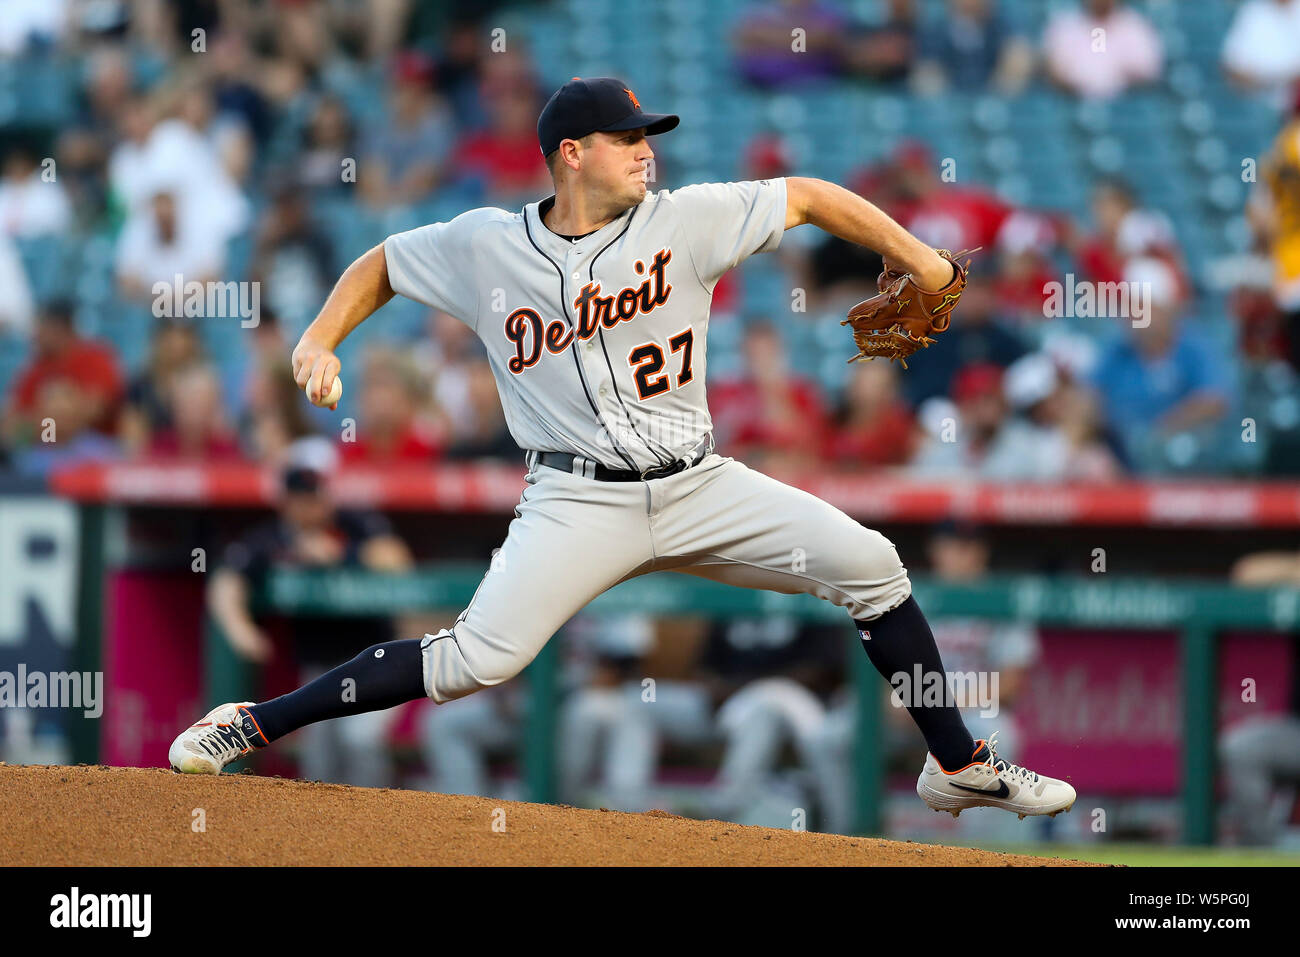 Anaheim, California, USA. July 29, 2019: Detroit Tigers starting pitcher Jordan Zimmermann (27) makes the start for the Tigers during the game between the Detroit Tigers and the Los Angeles Angels of Anaheim at Angel Stadium in Anaheim, CA, (Photo by Peter Joneleit, Cal Sport Media) Stock Photo